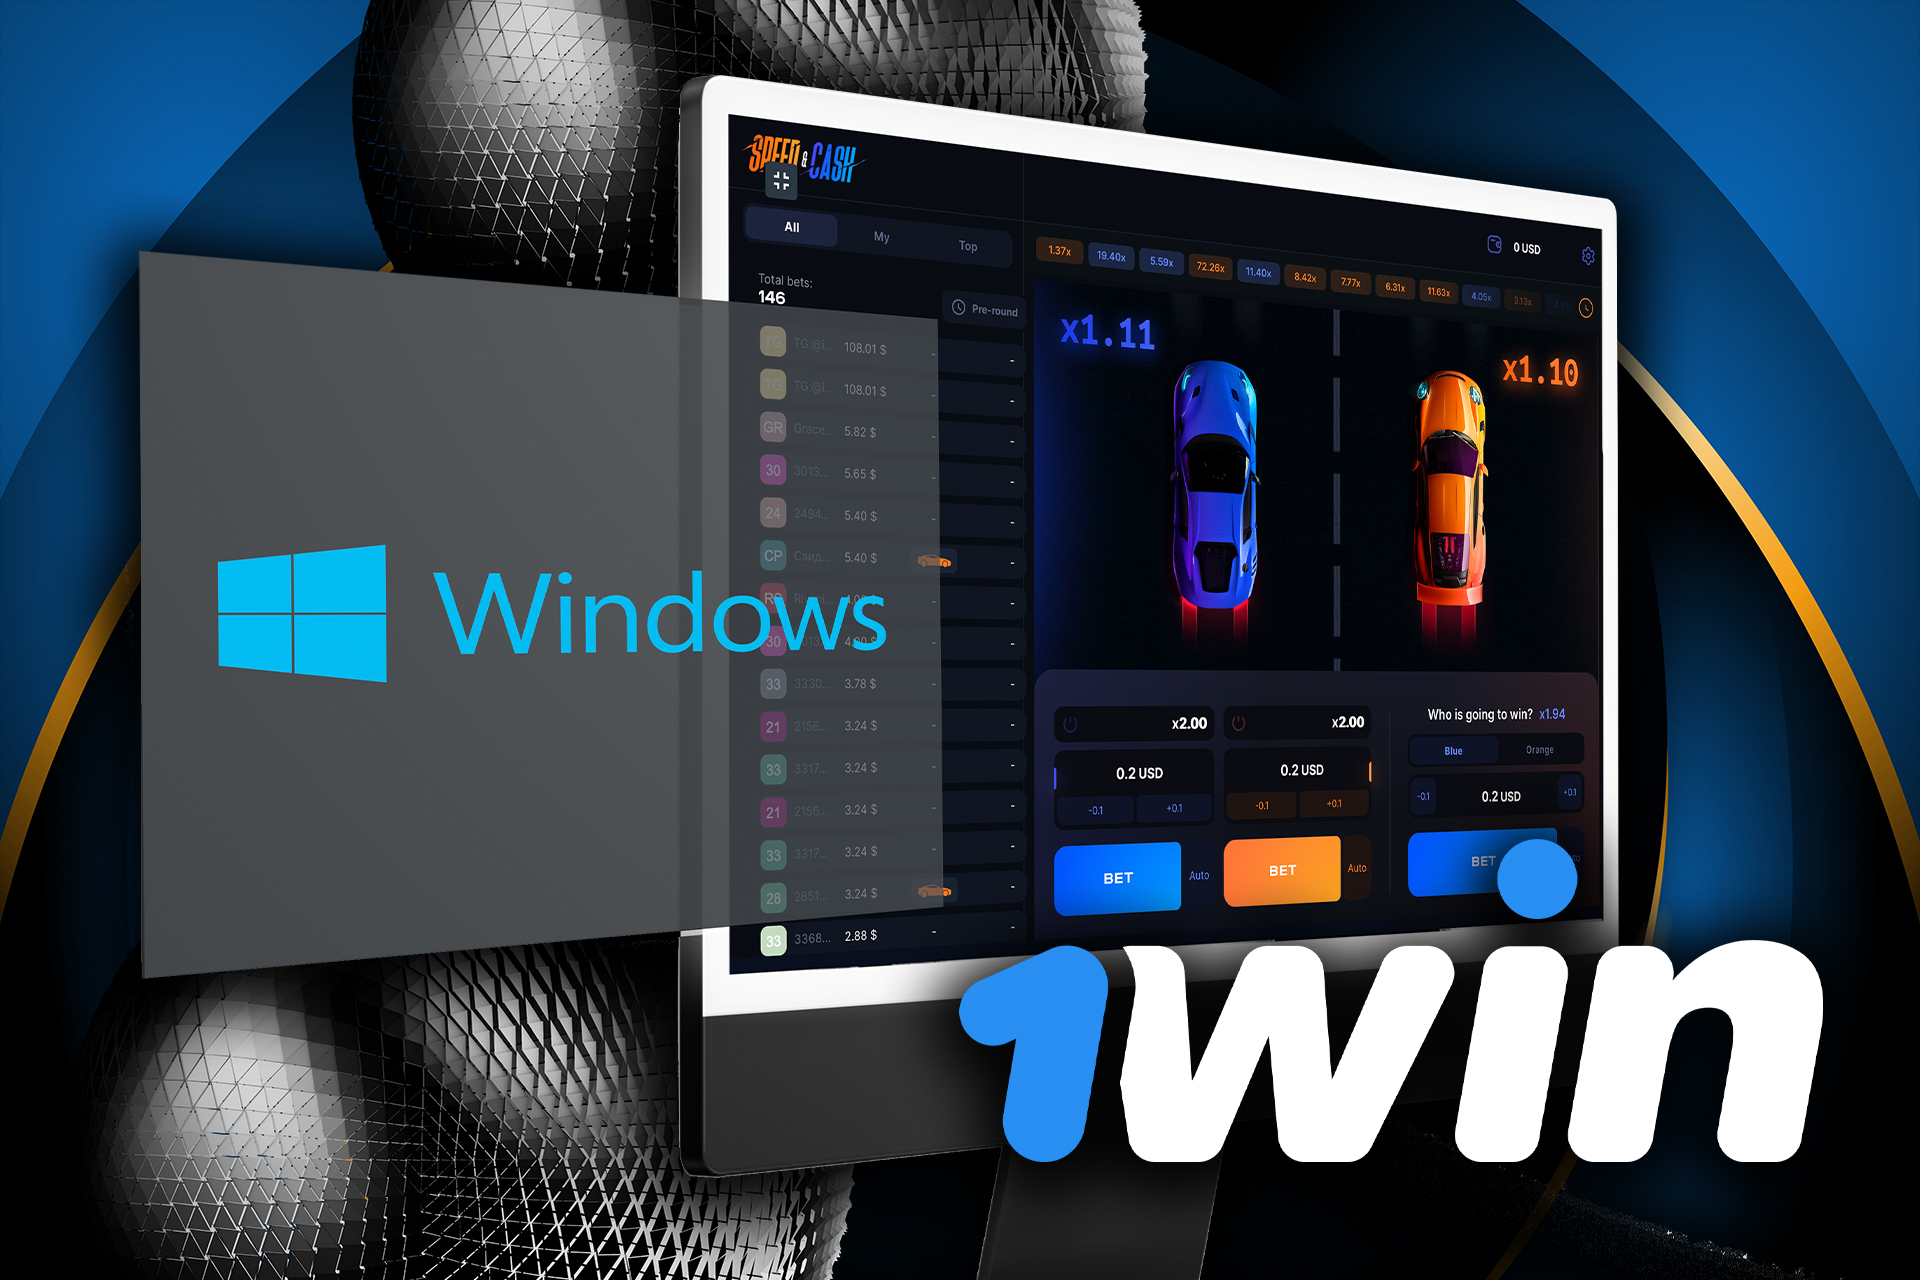 Install the desktop version of 1win on your laptop to play Speed and Cash.